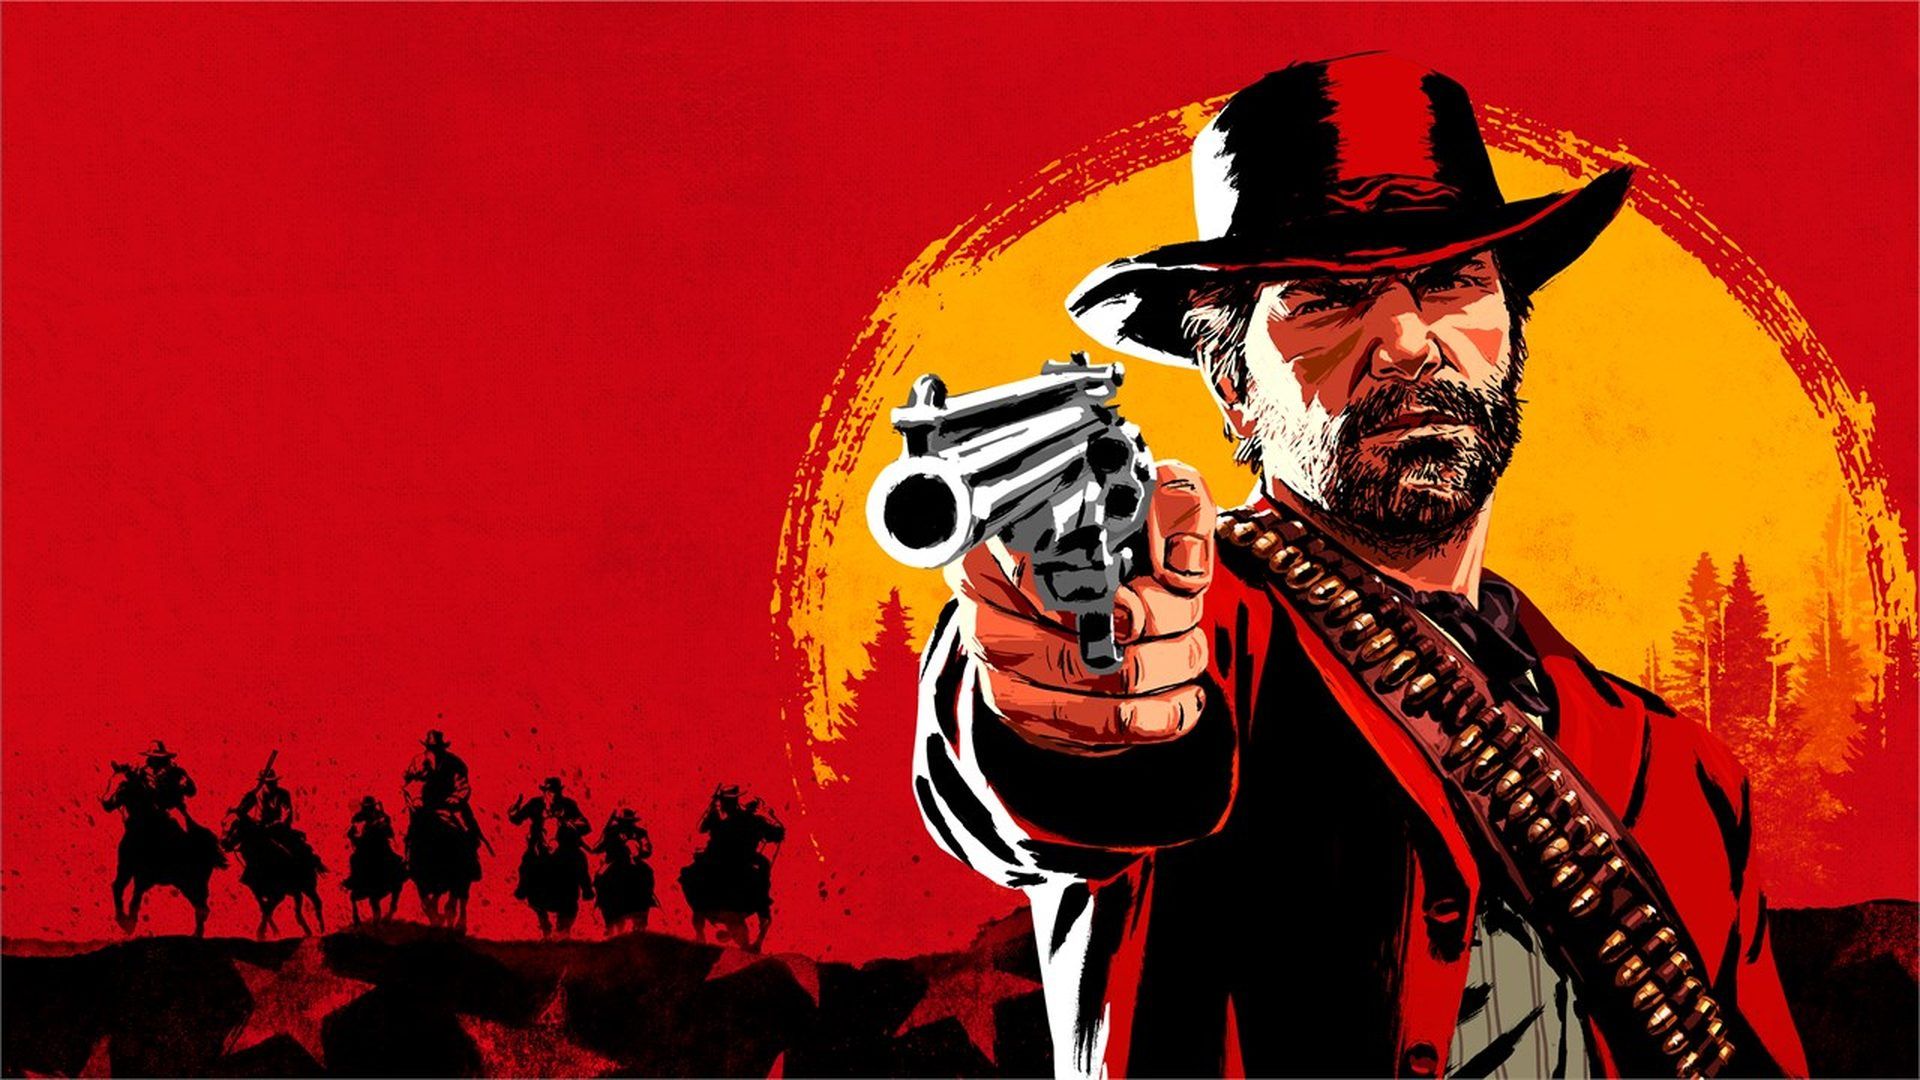 RDR remake leak: What does the new logo mean?